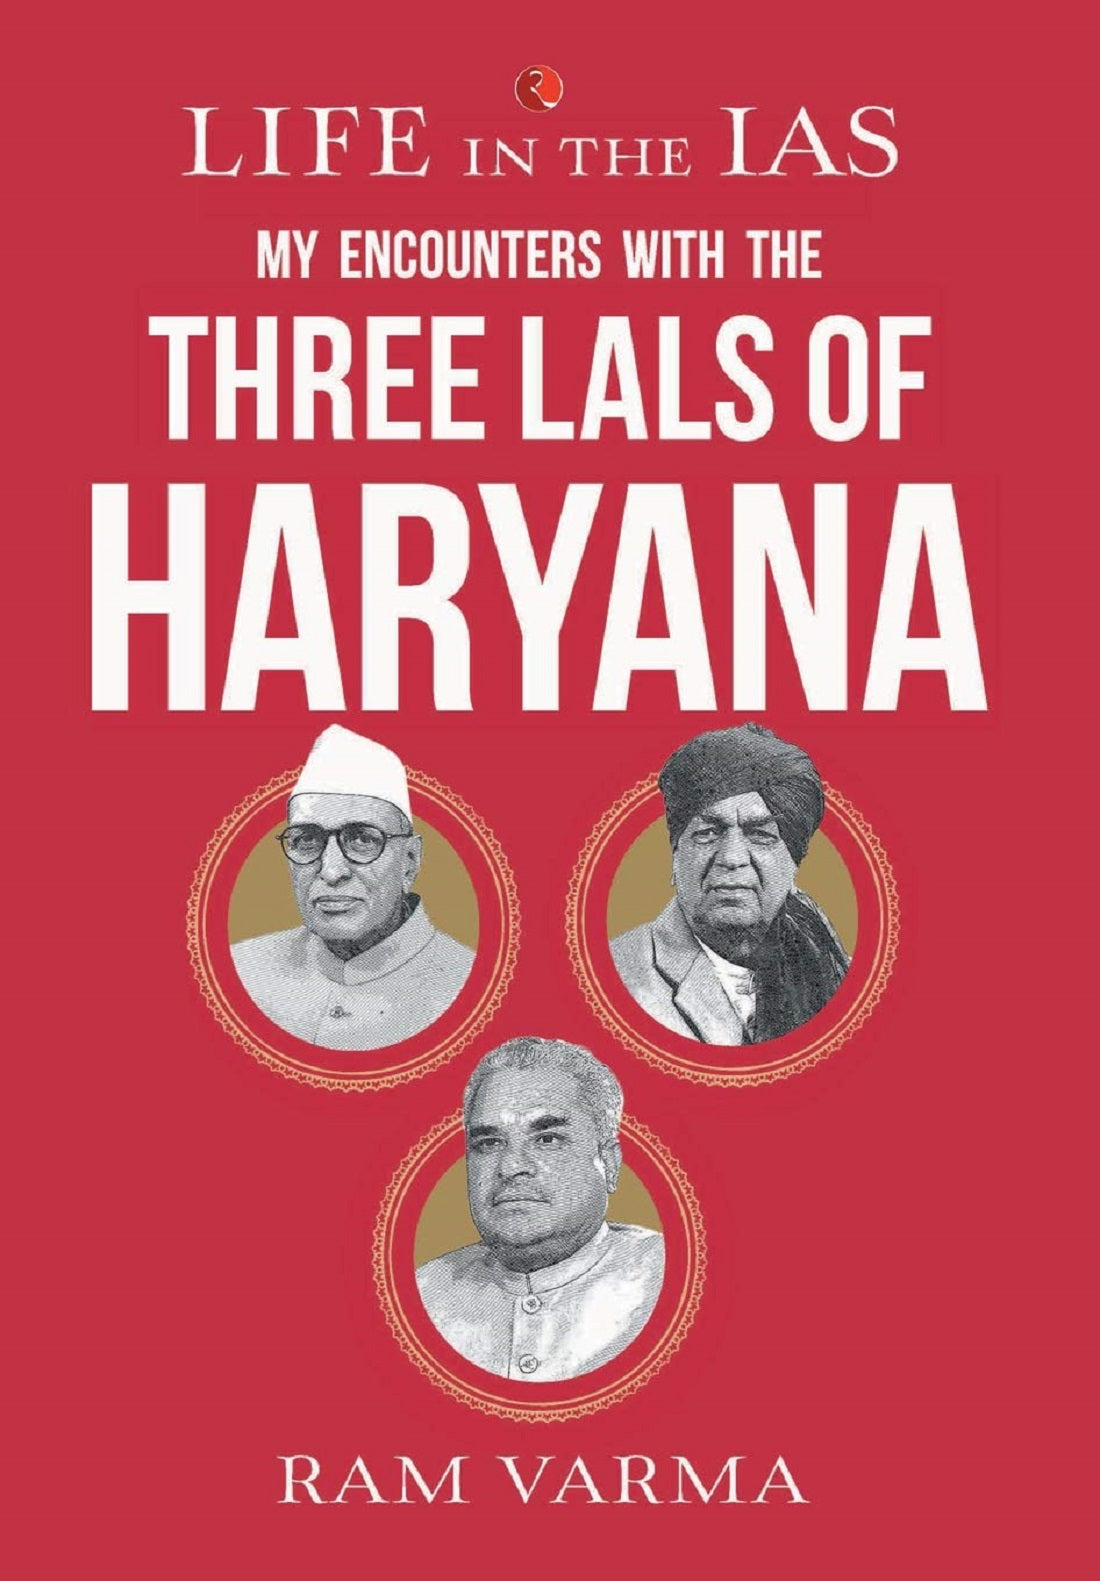 LIFE IN THE IAS - MY ENCOUNTERS WITH THE THREE LALS OF HARYANA